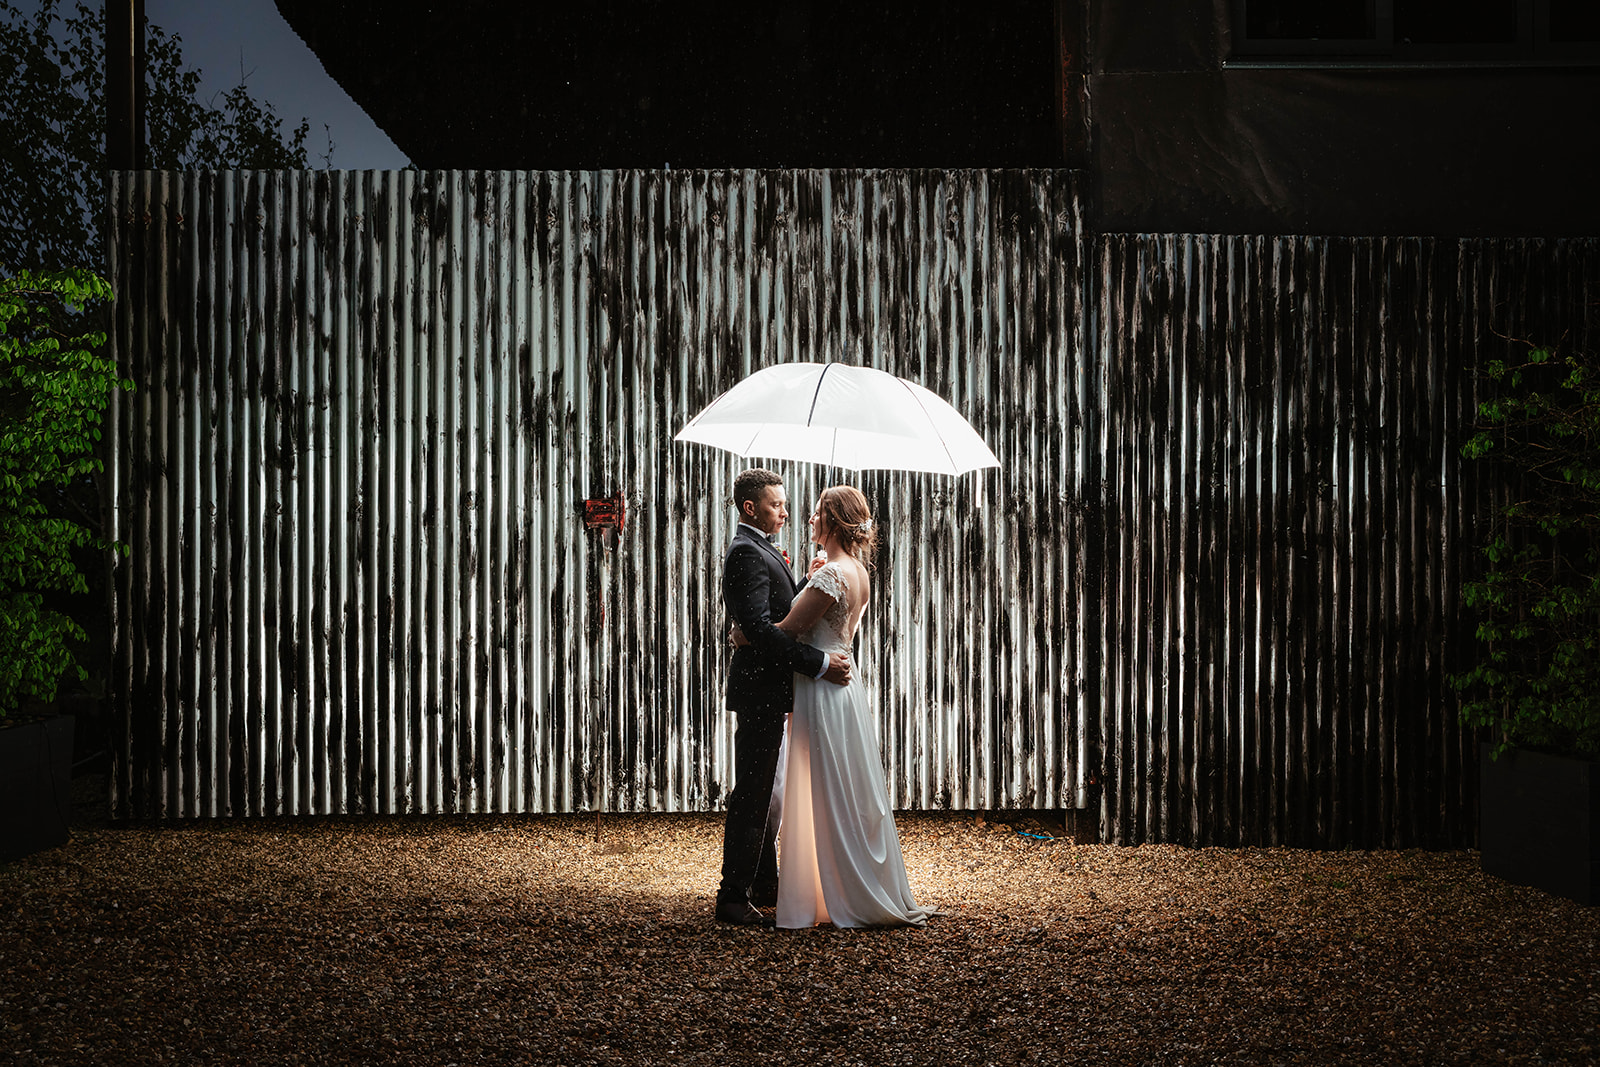 nighttime portraits of bride and groom in the rain